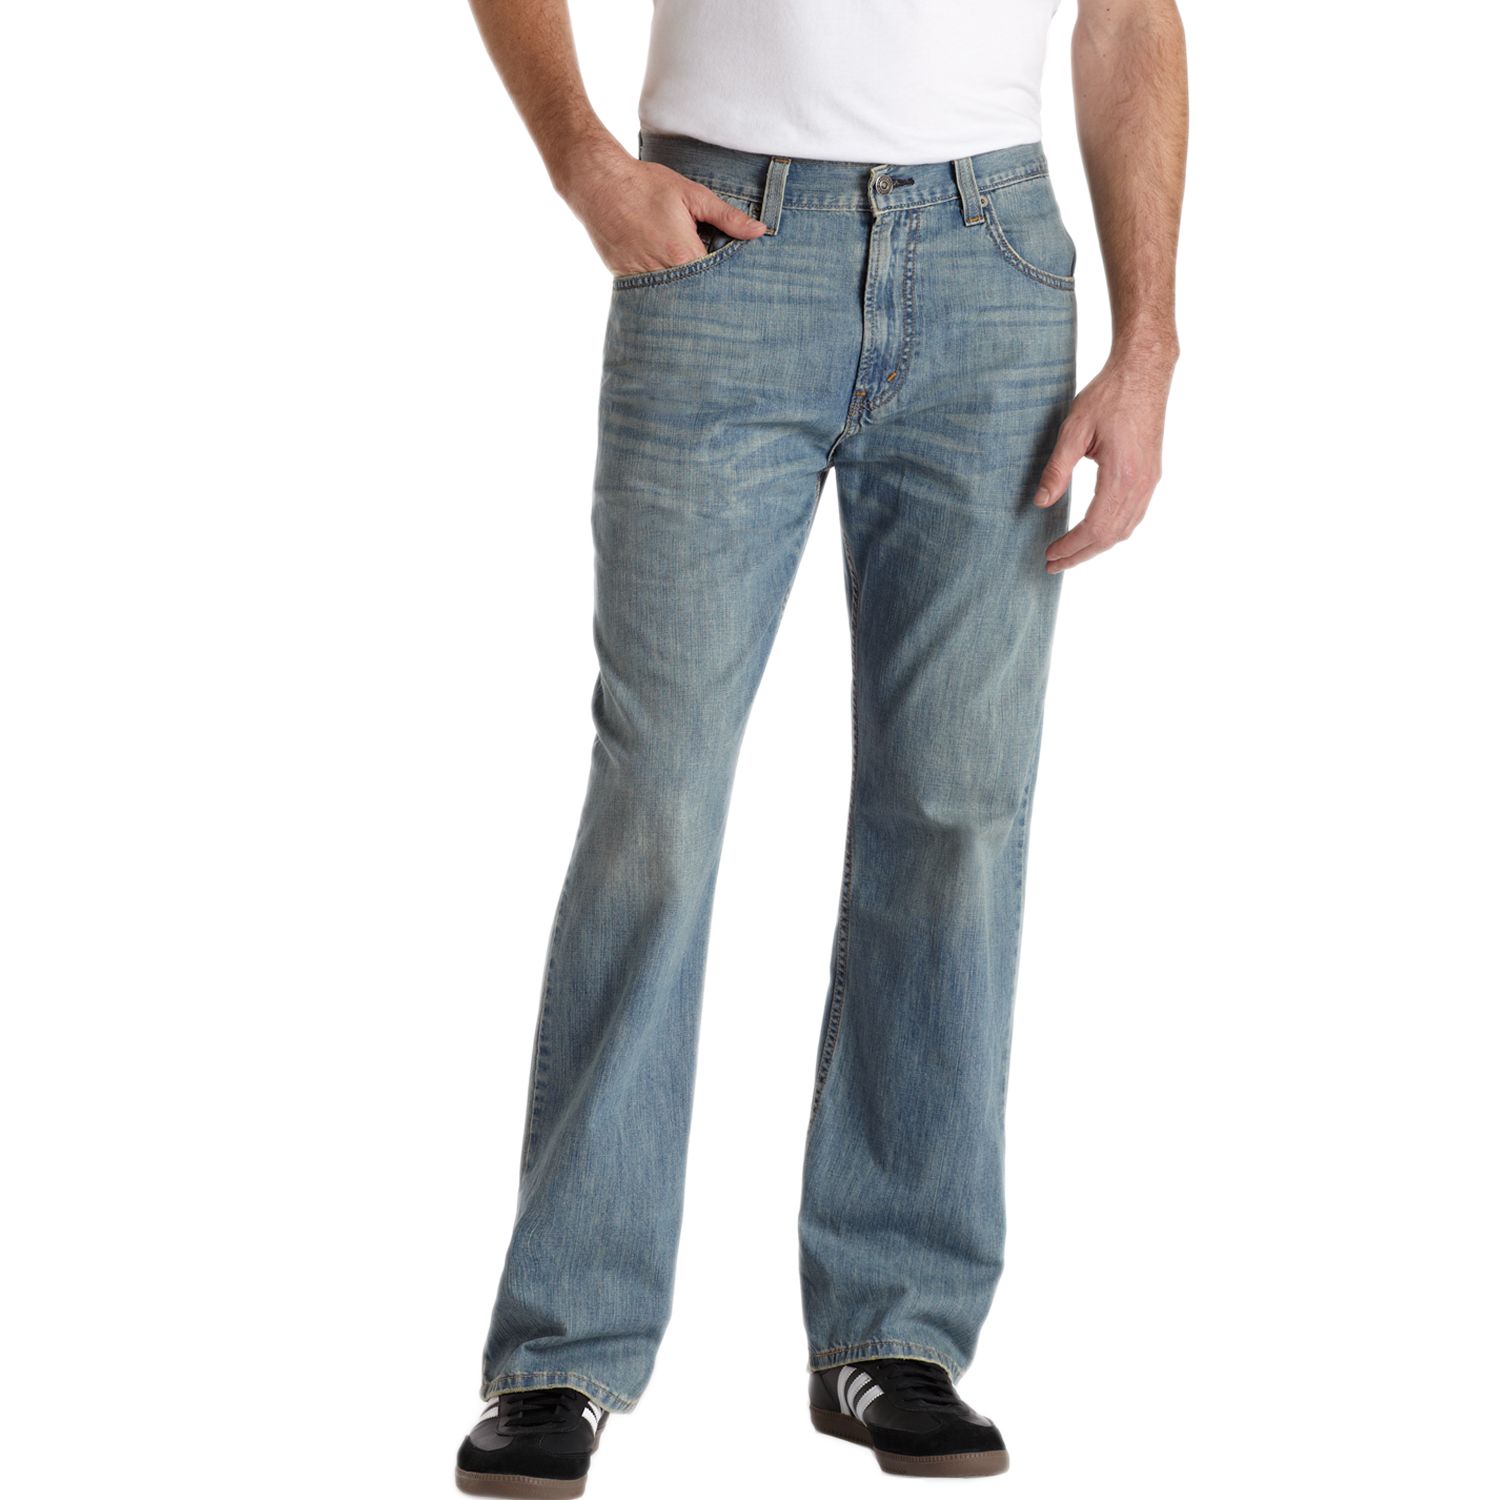 569™ Loose Straight Fit Jeans